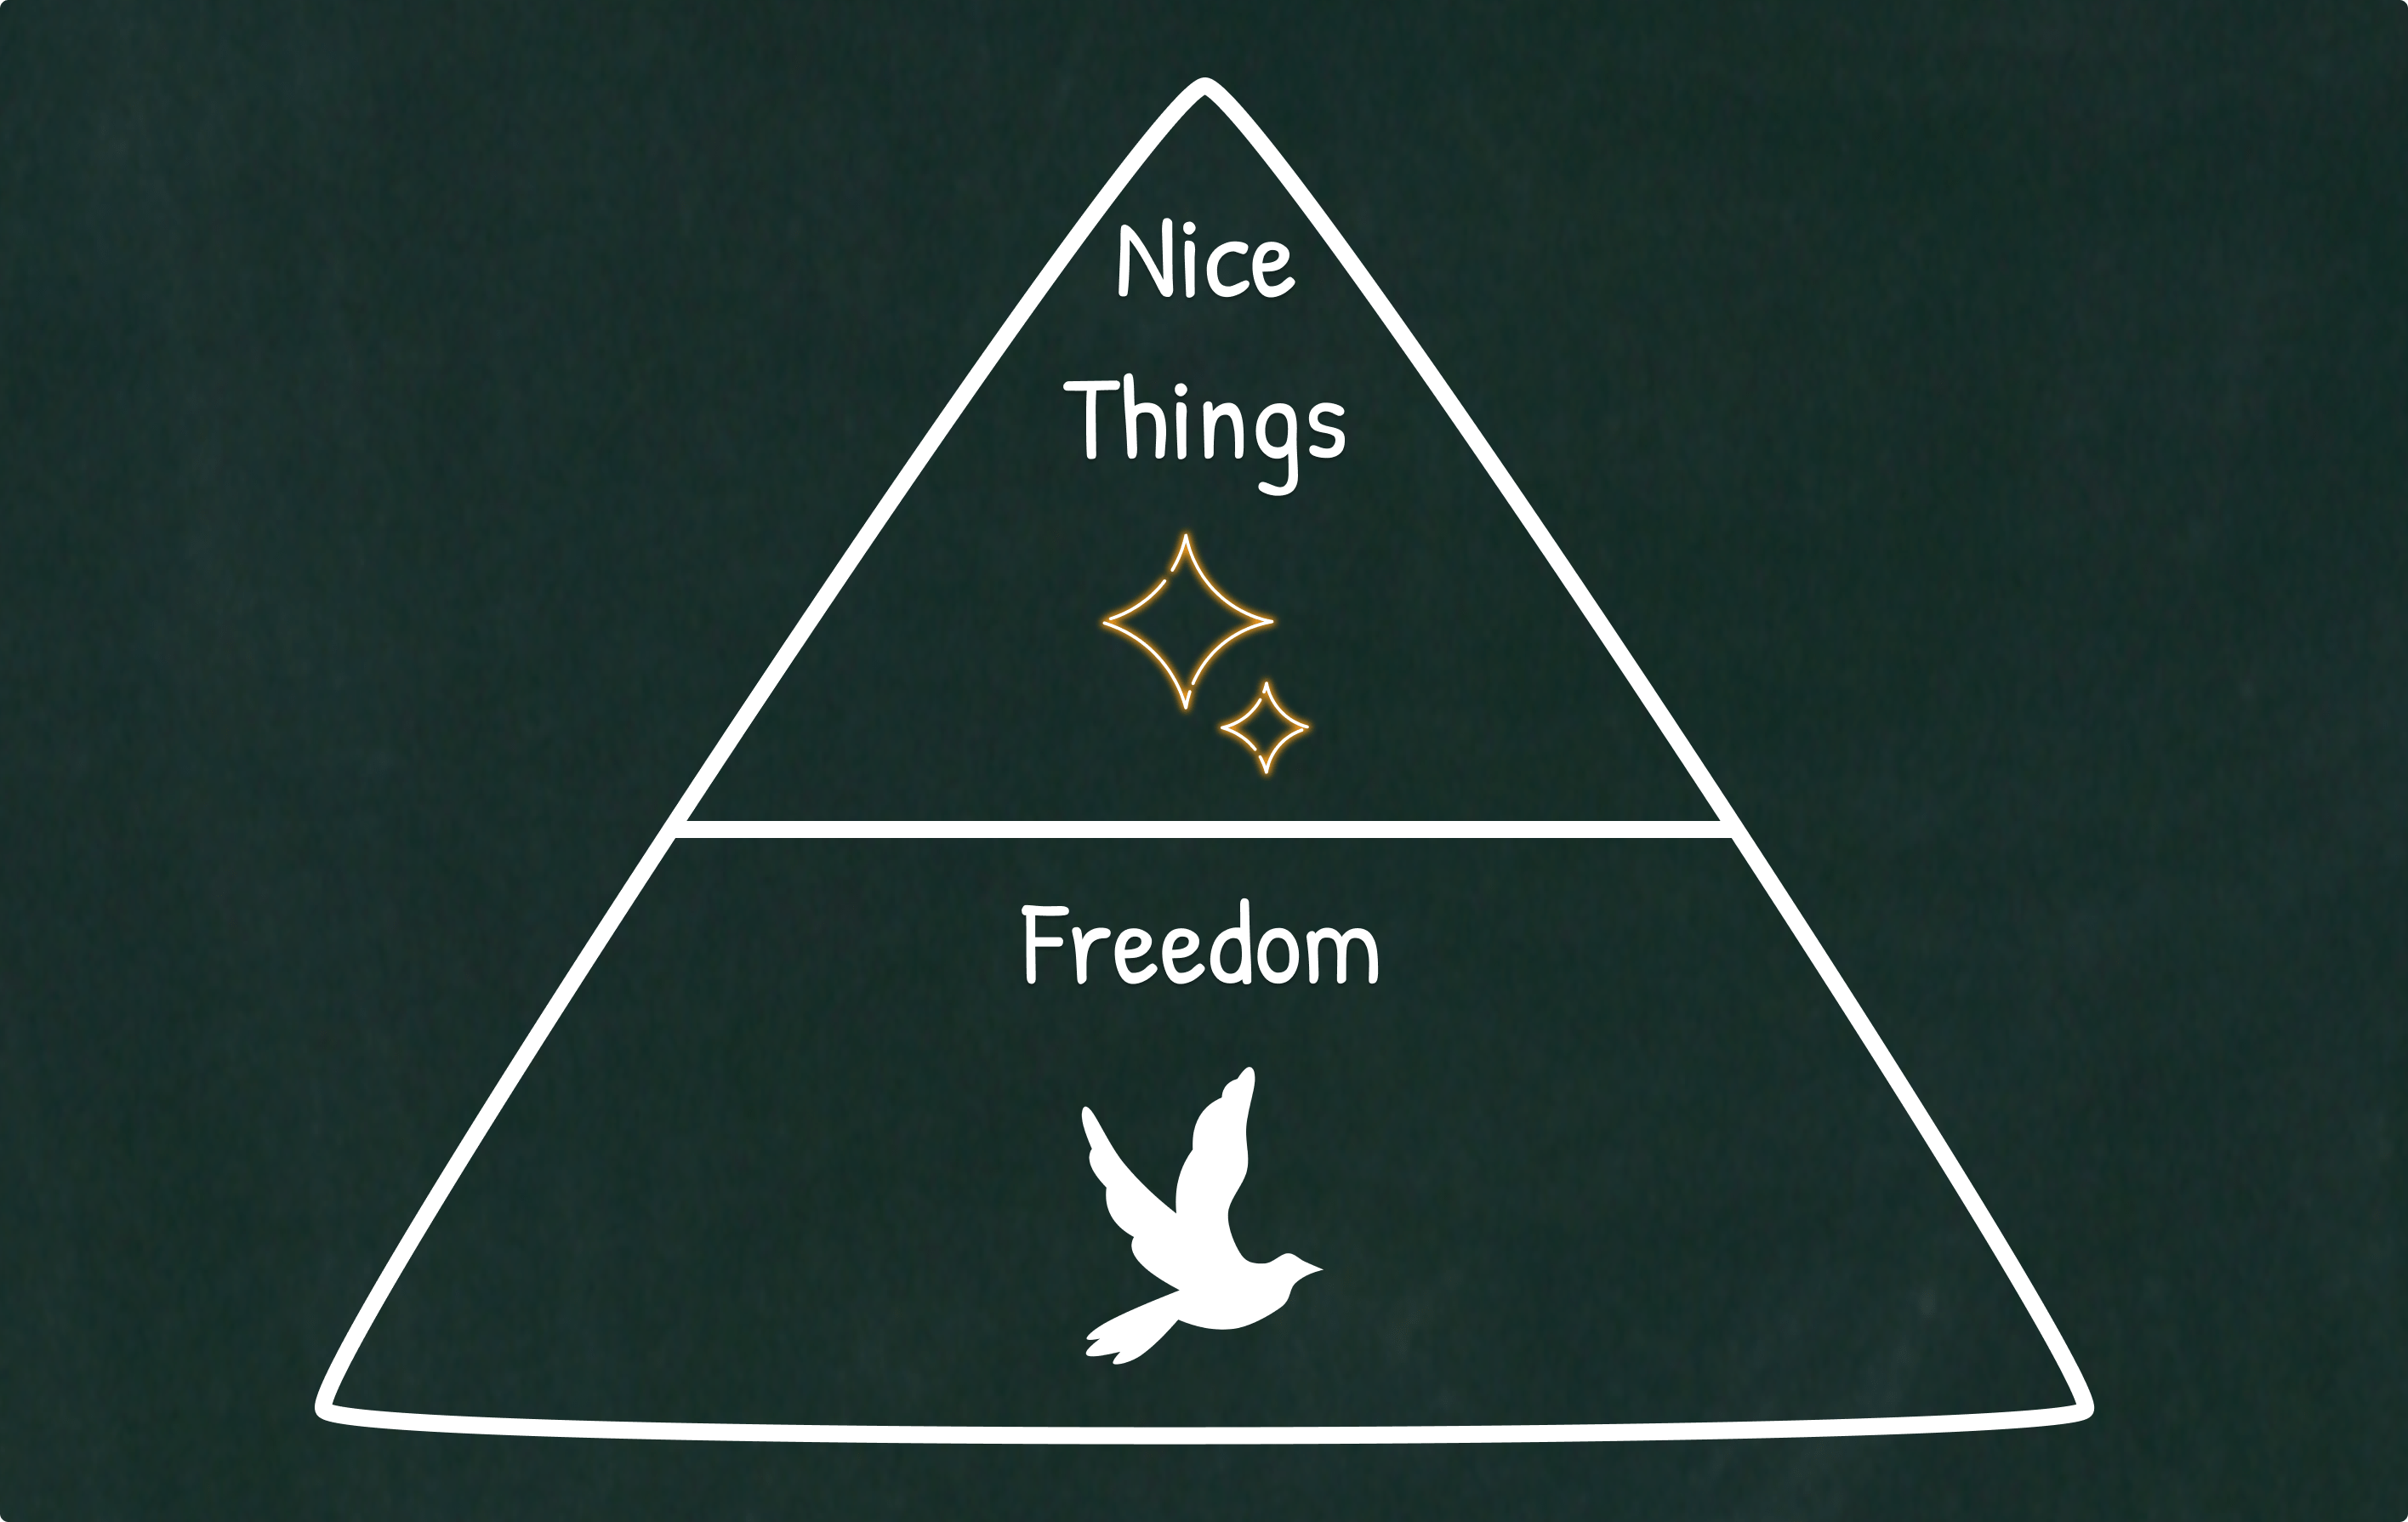 Pyramid in which Freedom is a higher priority than buying Nice Things